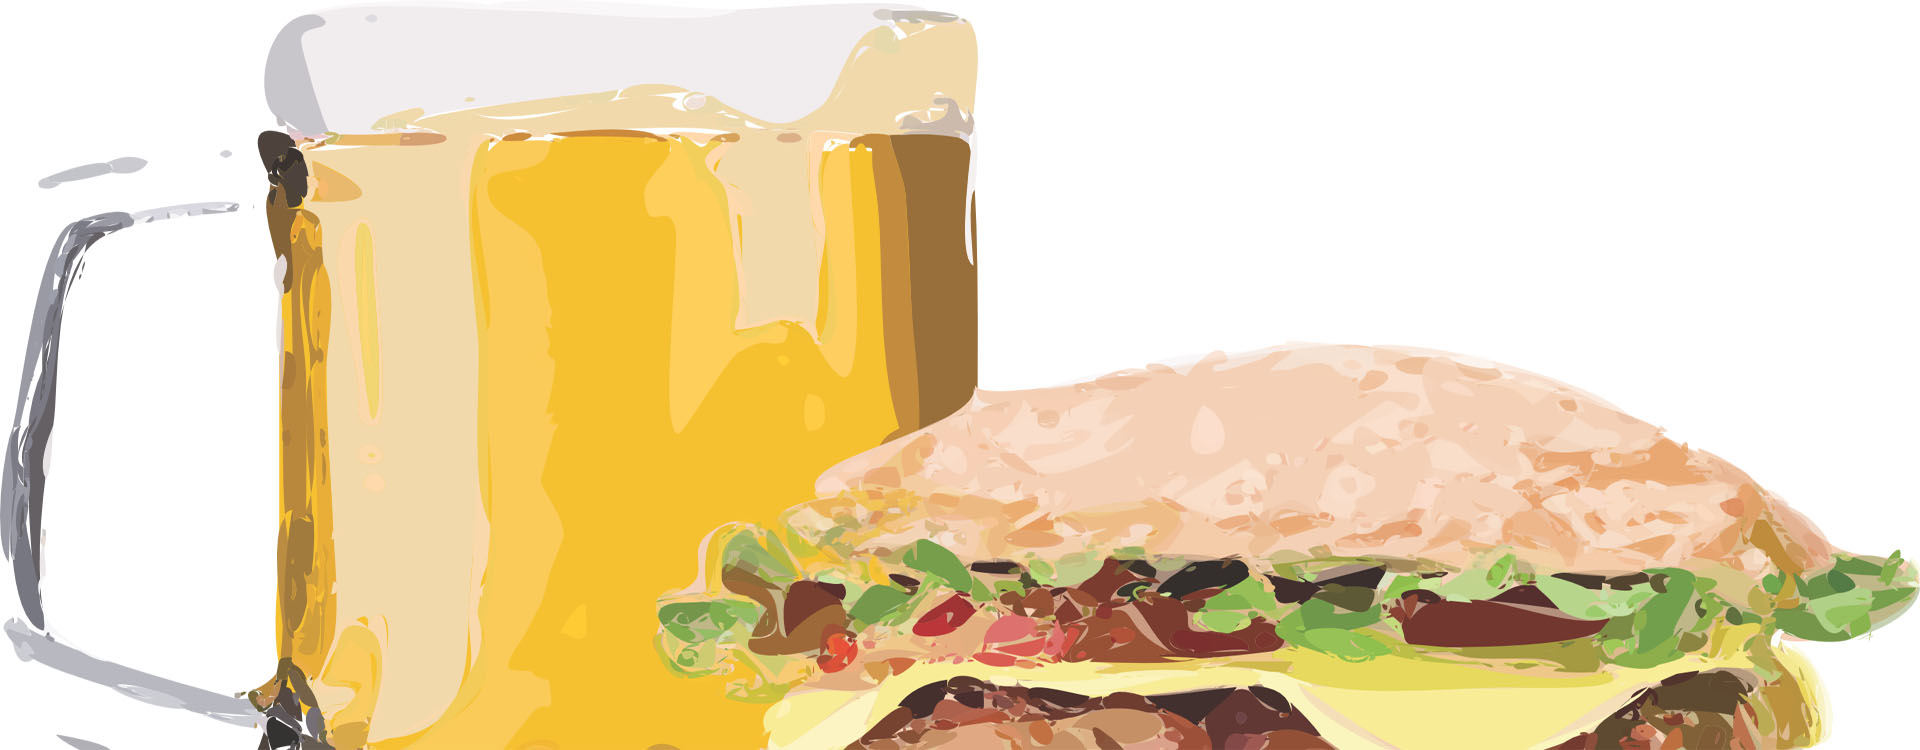 Gout - Beer & Meat Banner Picture